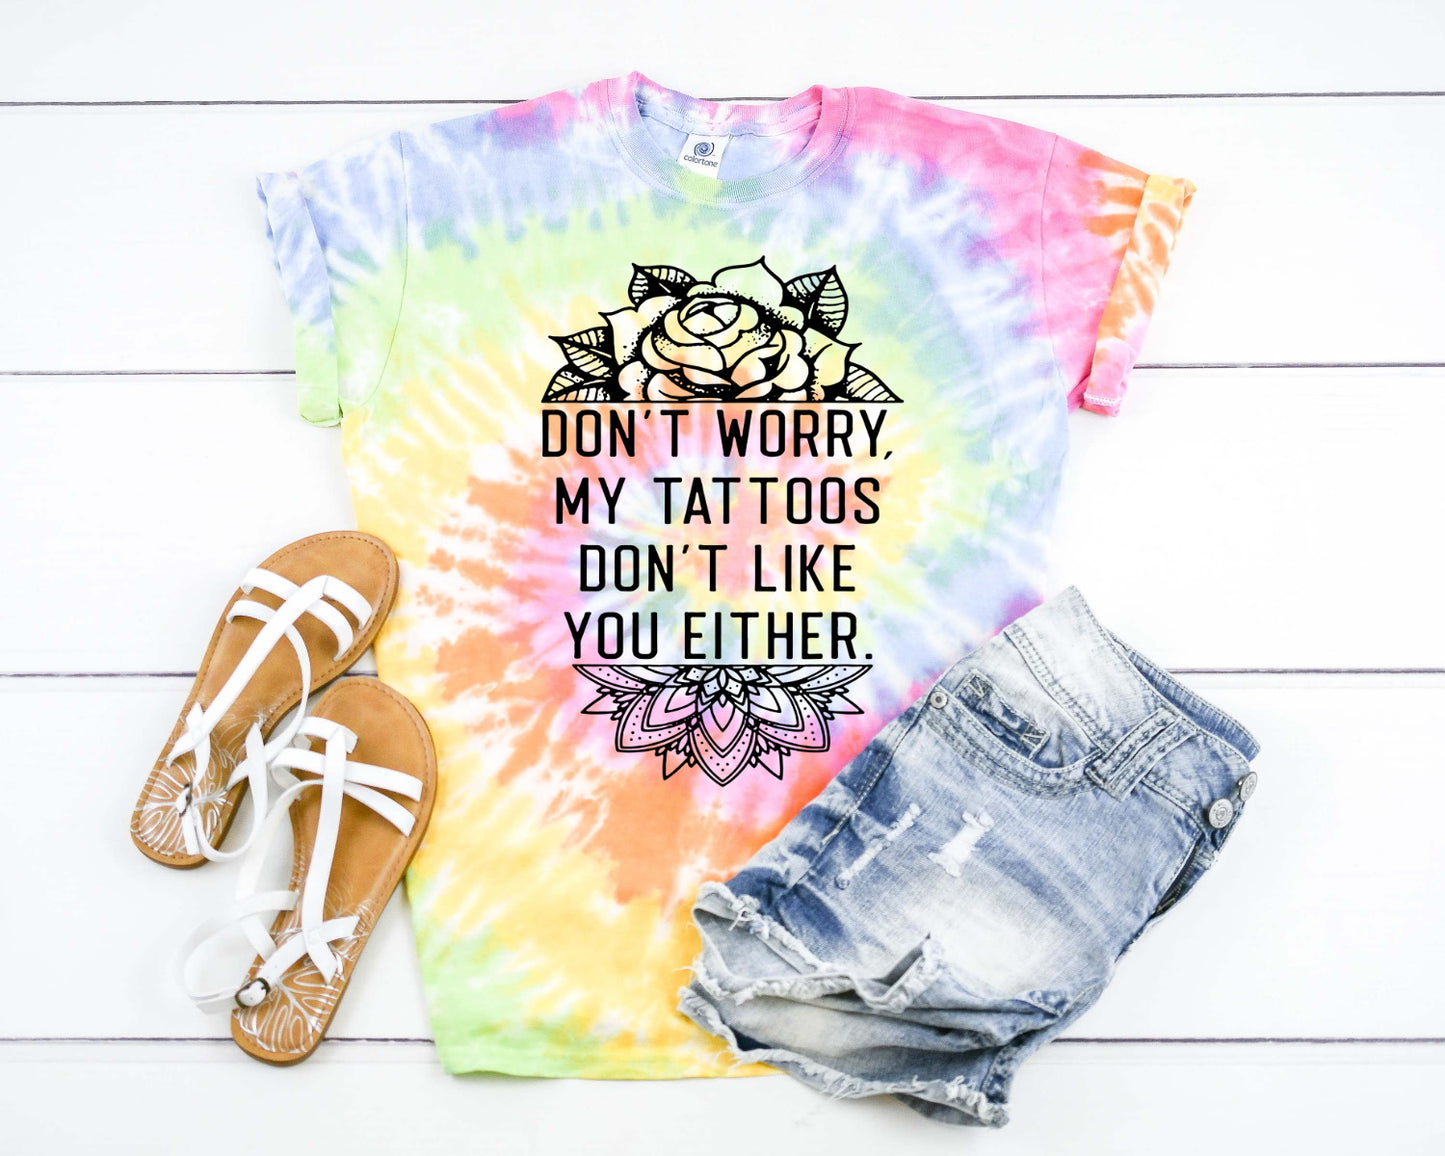 Don't Worry My Tattoo's Don't Like You Either, Tattooed Summertime Woman's Novelty Tie Dye Graphic Tee T-Shirt